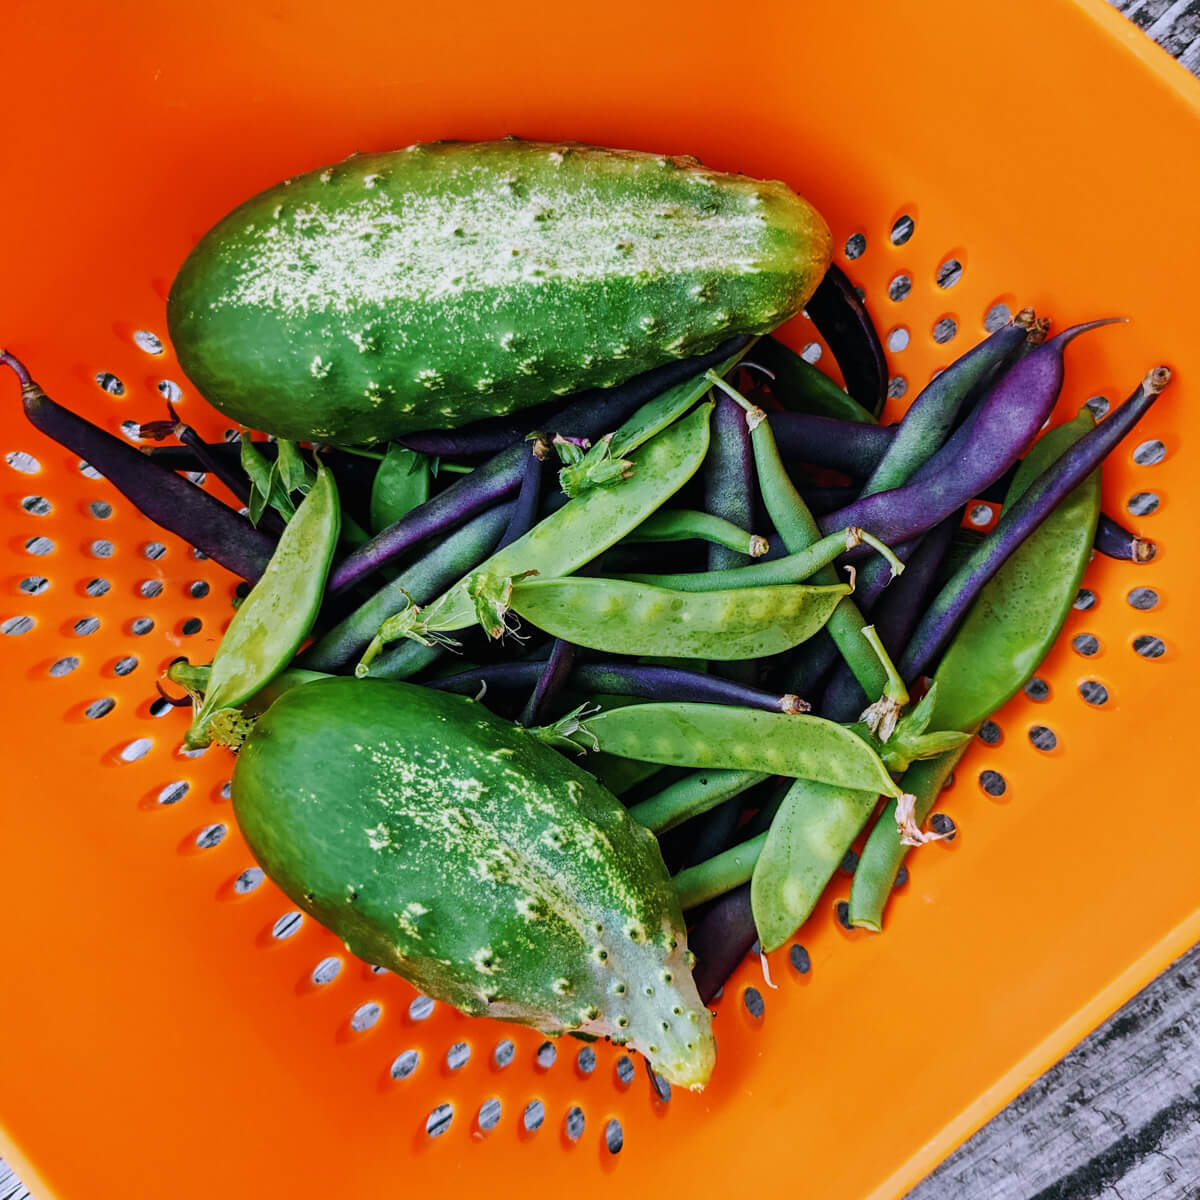 Pickling Cucumbers and Snow Peas and Beans Harvest from our 2021 Garden in an orange colander